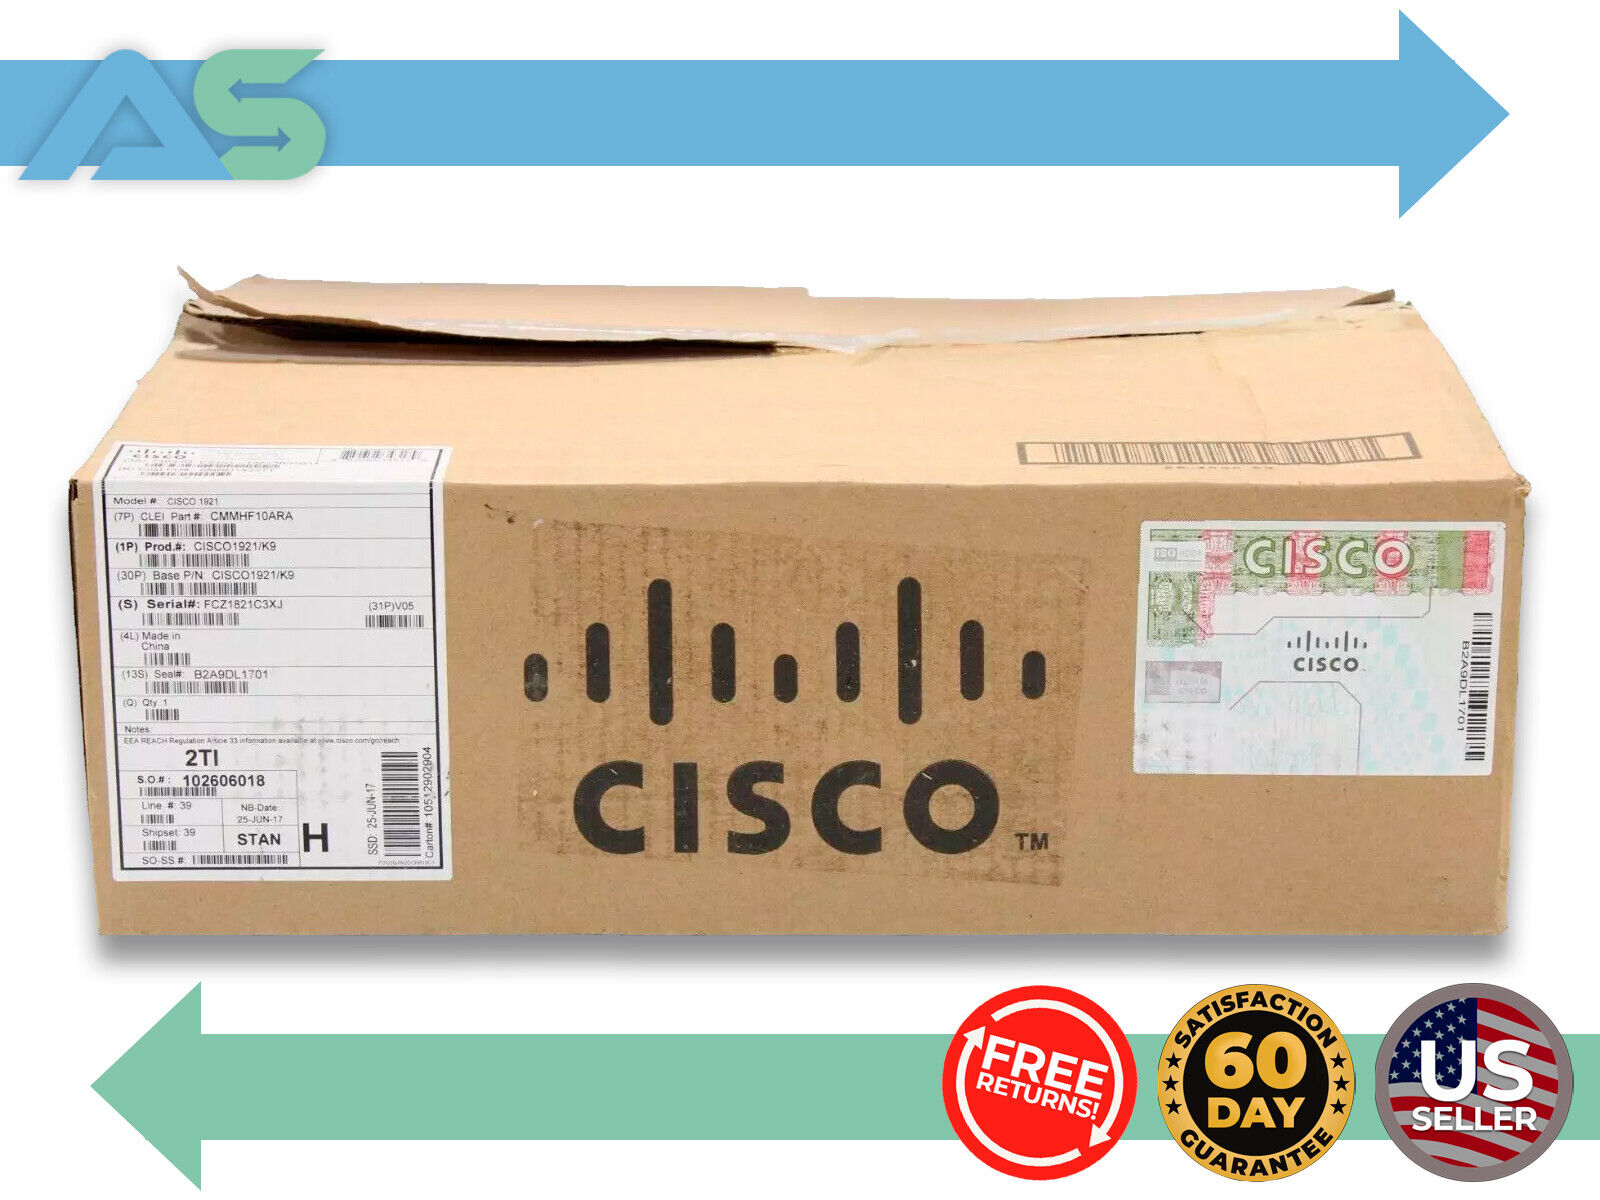 Cisco Systems 1921 1900 Series Integrated Services Router, CISCO1921-SEC/K9